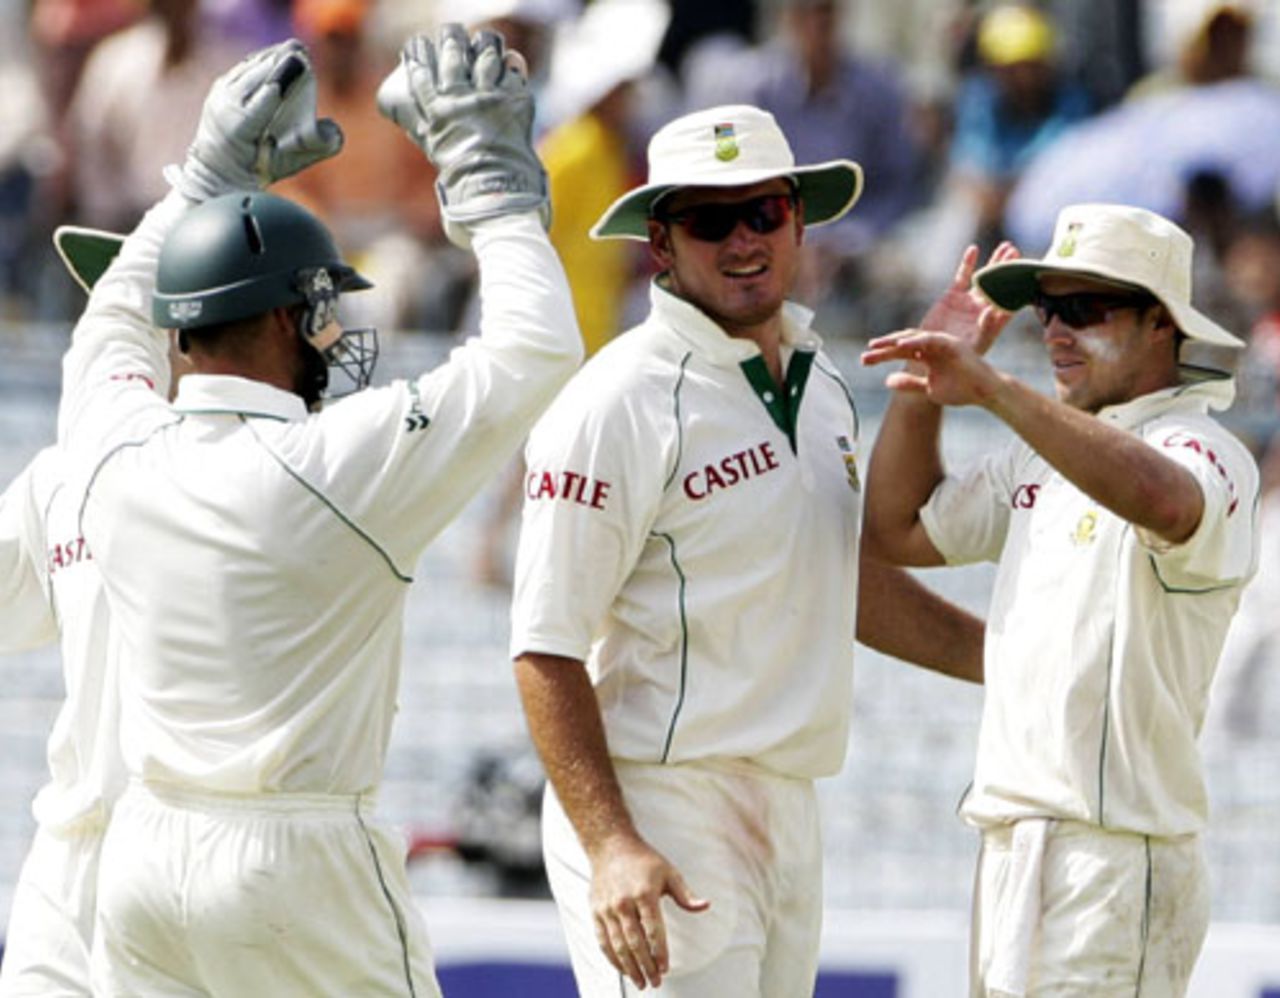 AB de Villiers celebrates with his team-mates after taking the catch to dismiss Yuvraj Singh, India v South Africa, 3rd Test, Kanpur, 2nd day, April 12, 2008 